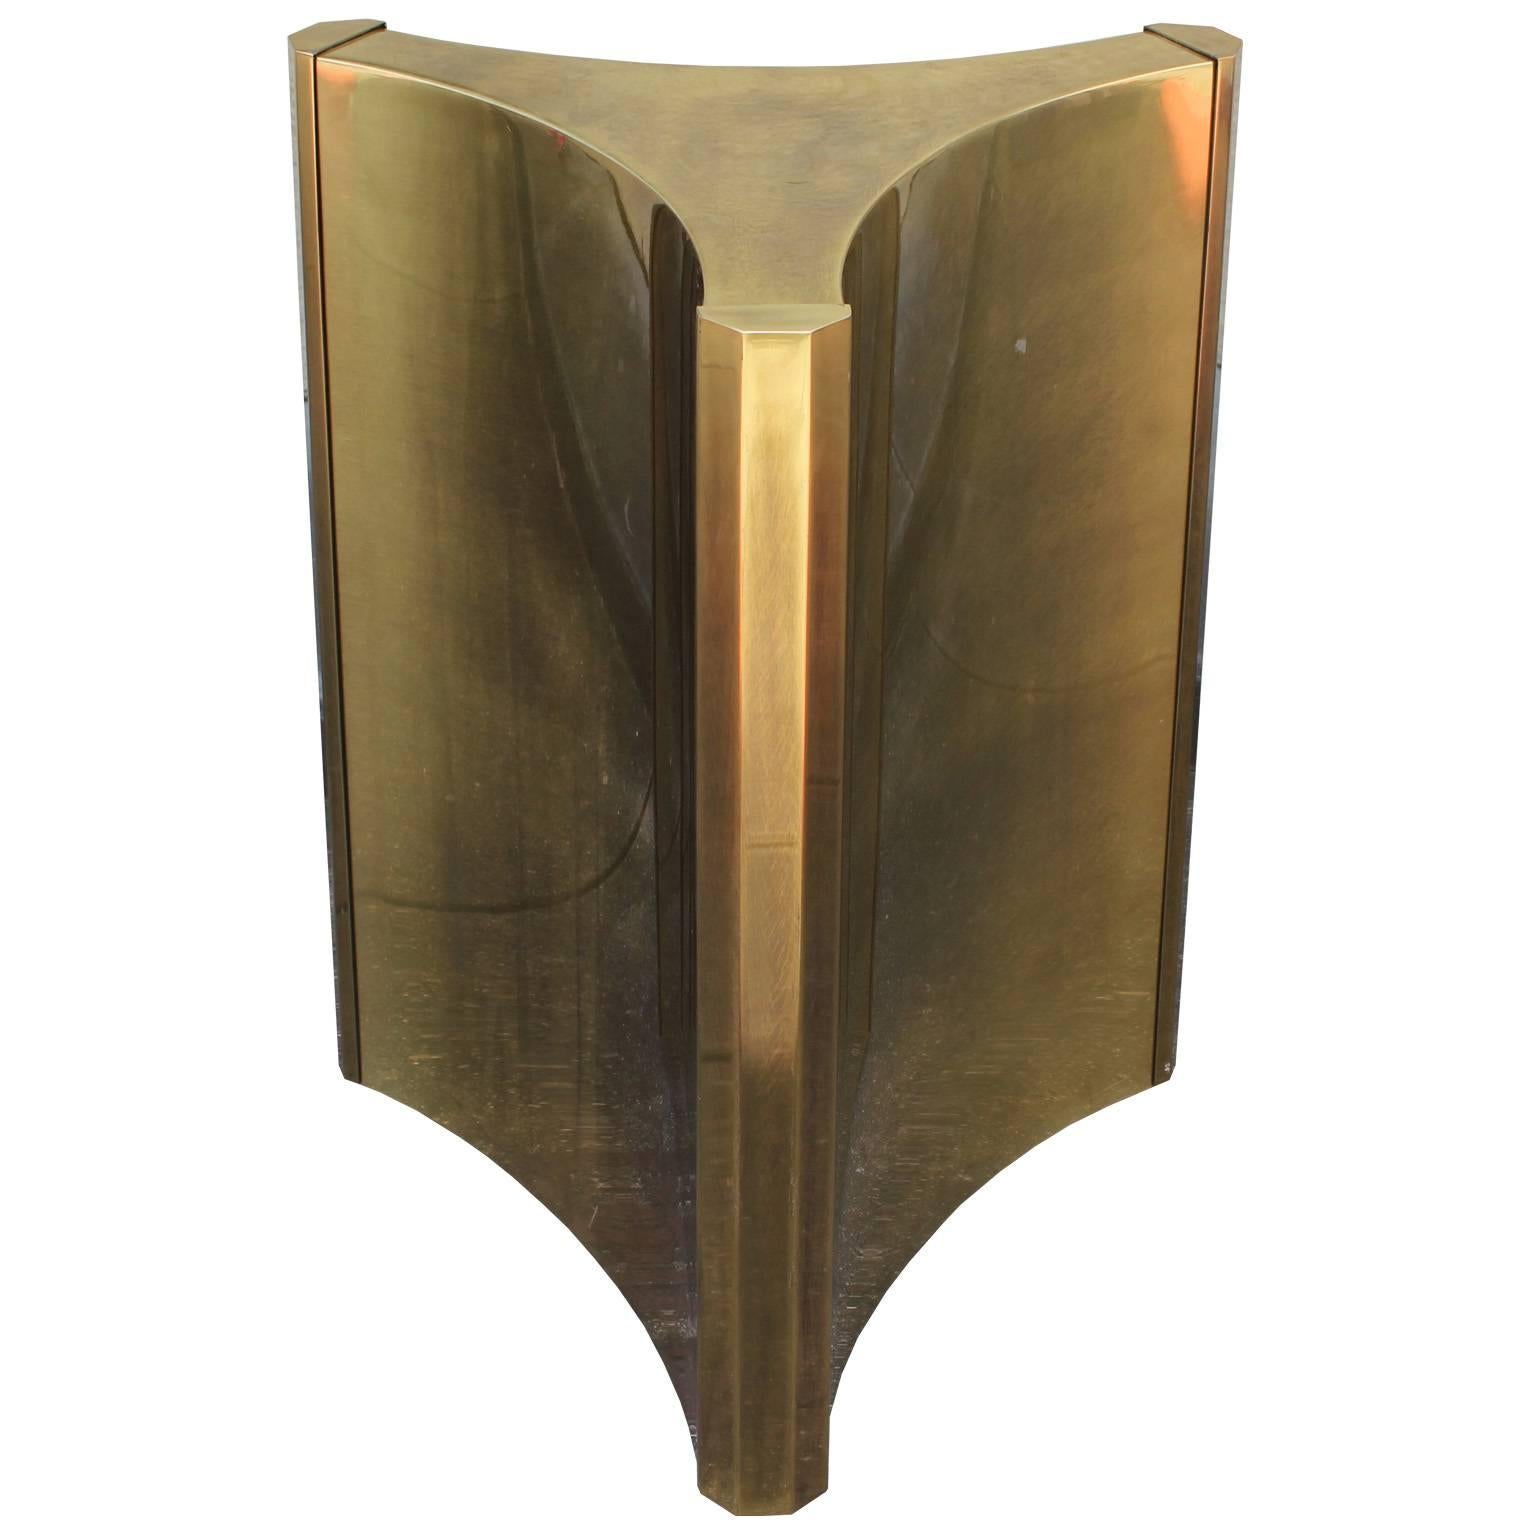 Fabulous brass pedestal table base by Mastercraft. Table base has elegant lines and would be perfect topped in glass or Lucite.